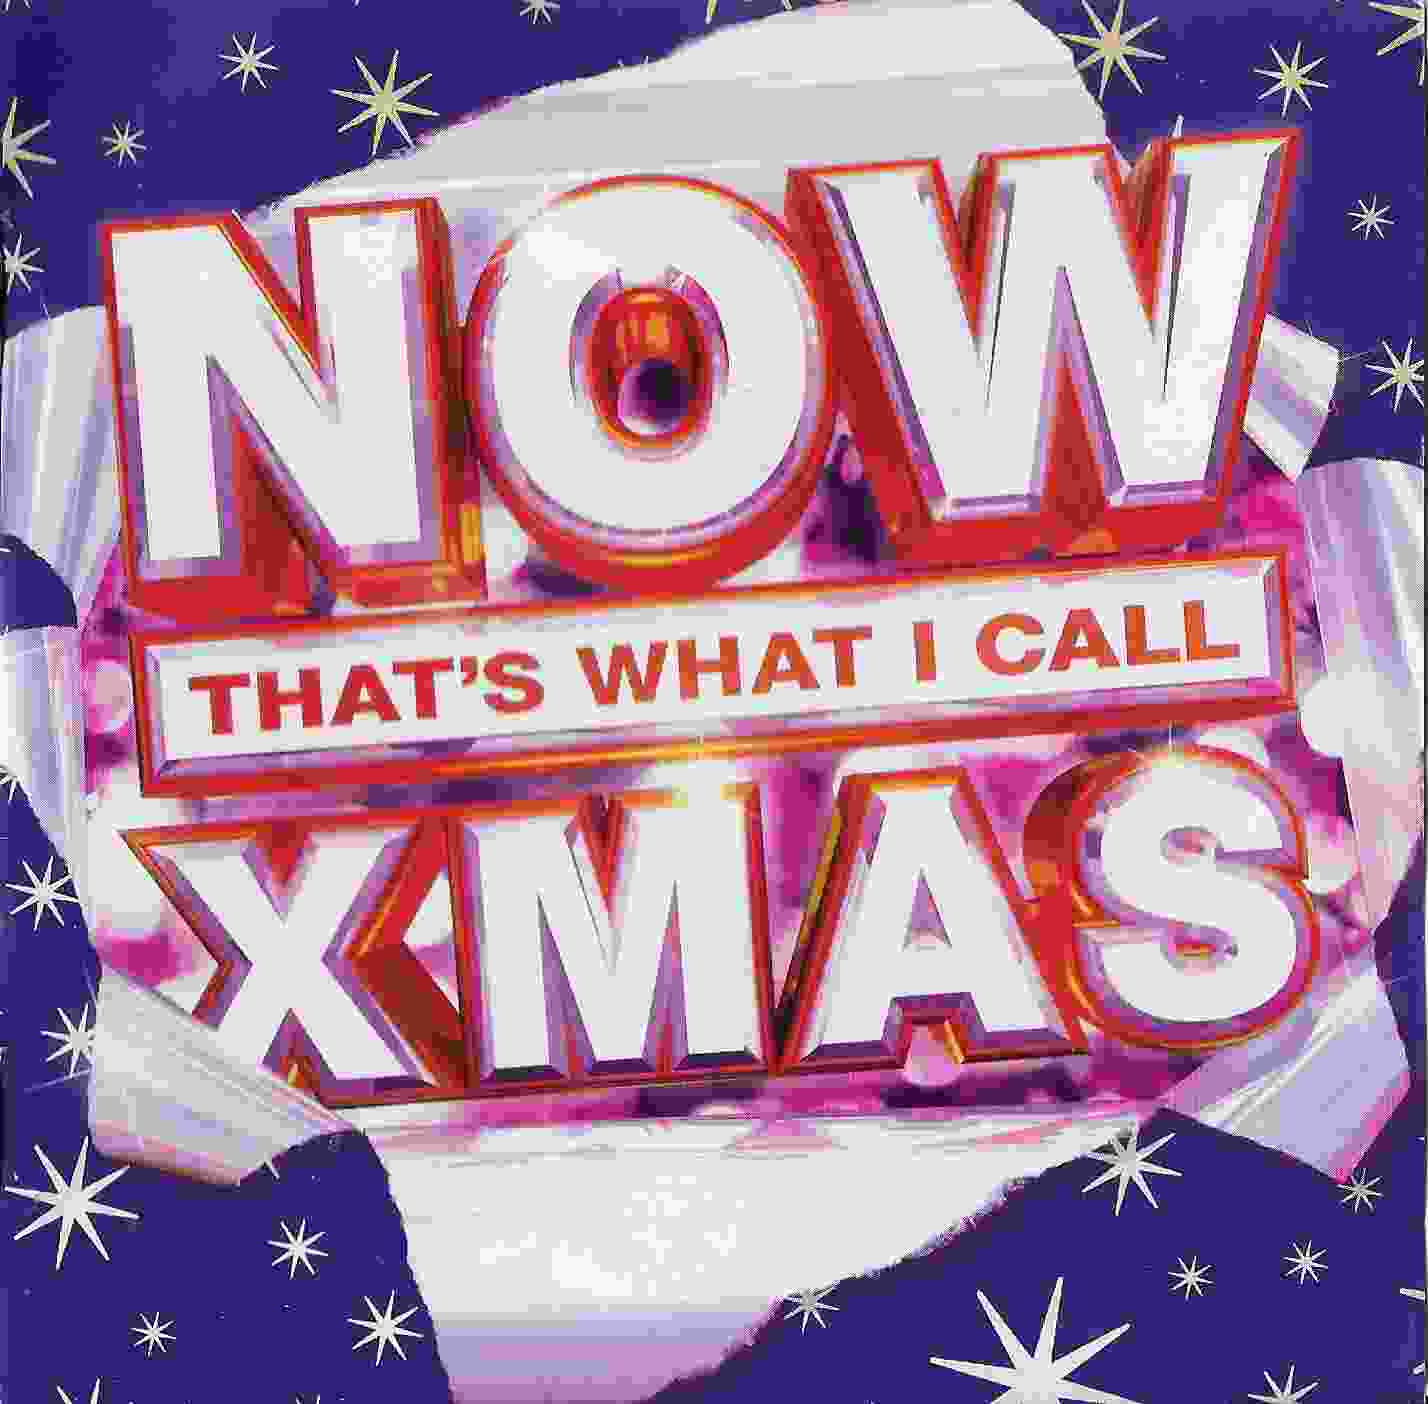 Picture of Now that's what I call Xmas by artist Various 